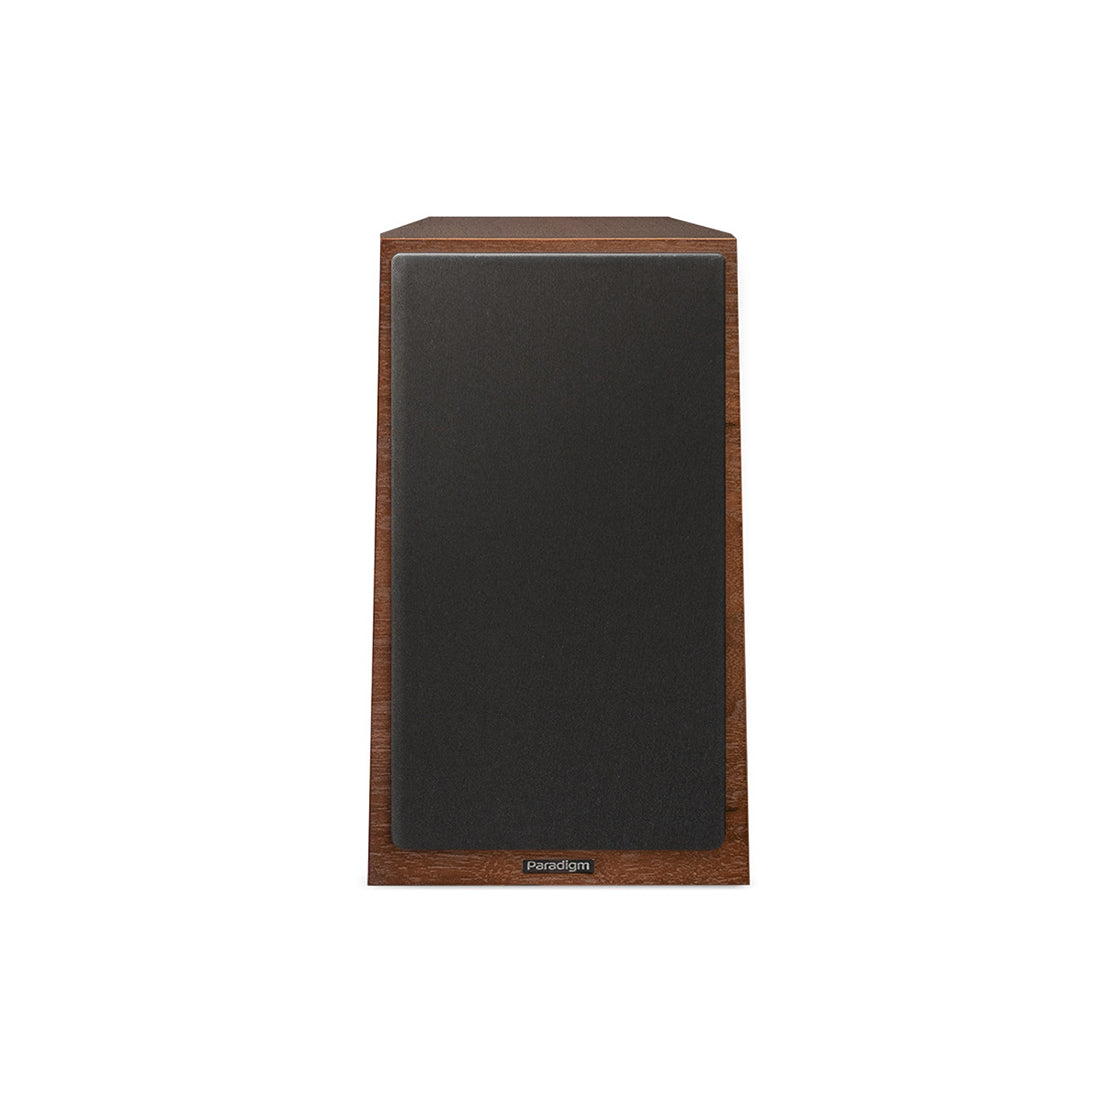 Paradigm Founder 40B Speakers Walnut Front Grille